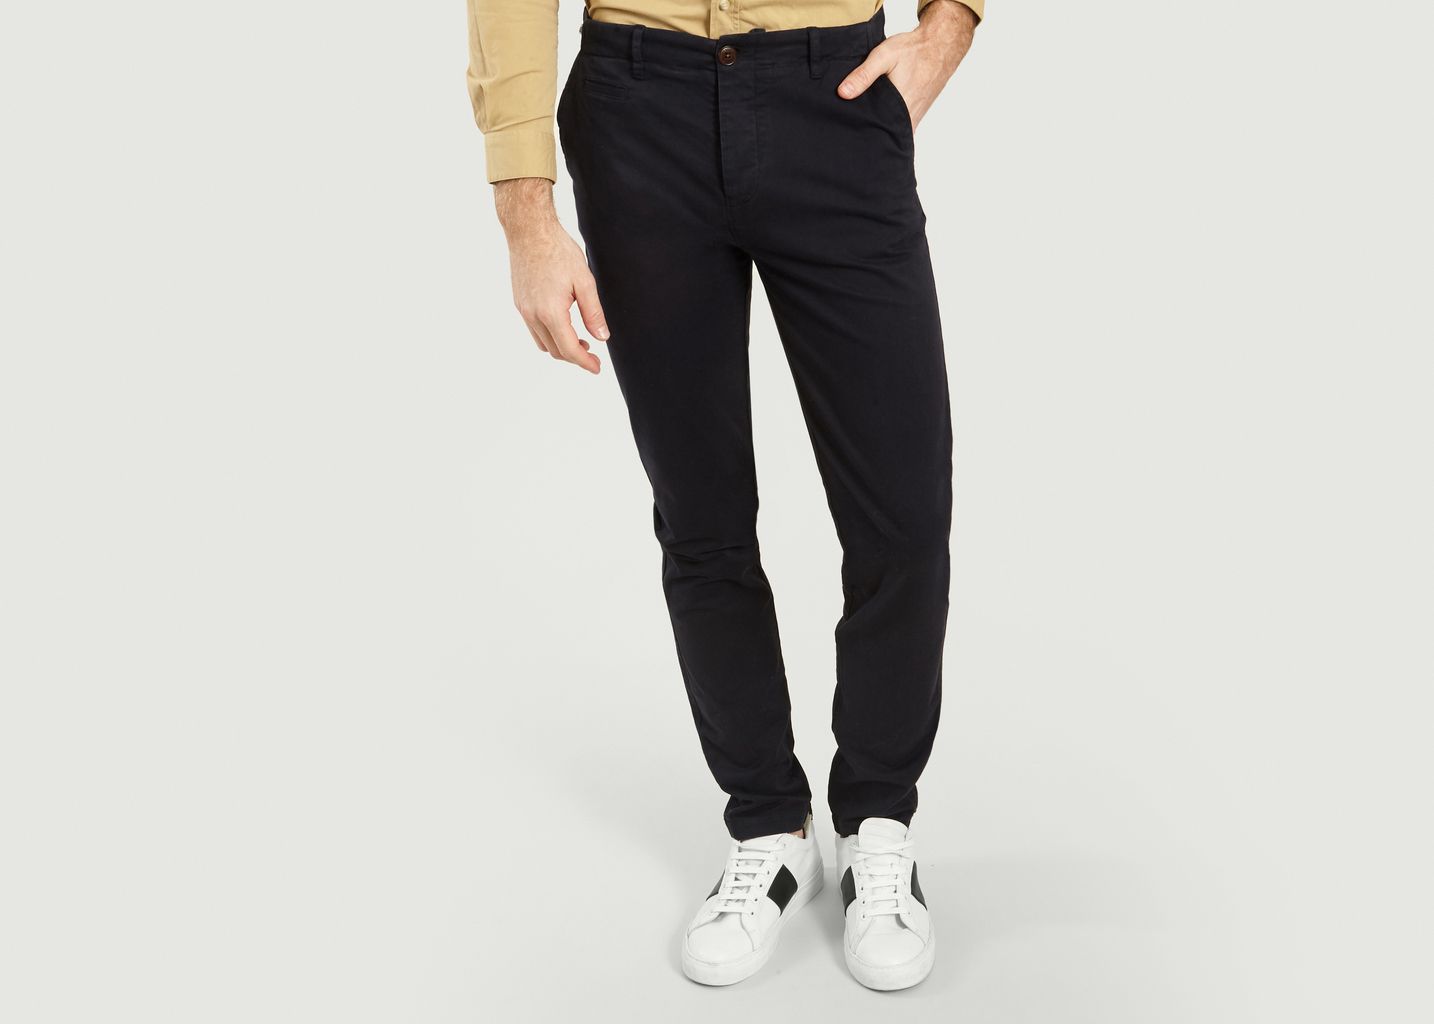 Cuisse de Grenouille Dark Navy Classic Chino Trousers